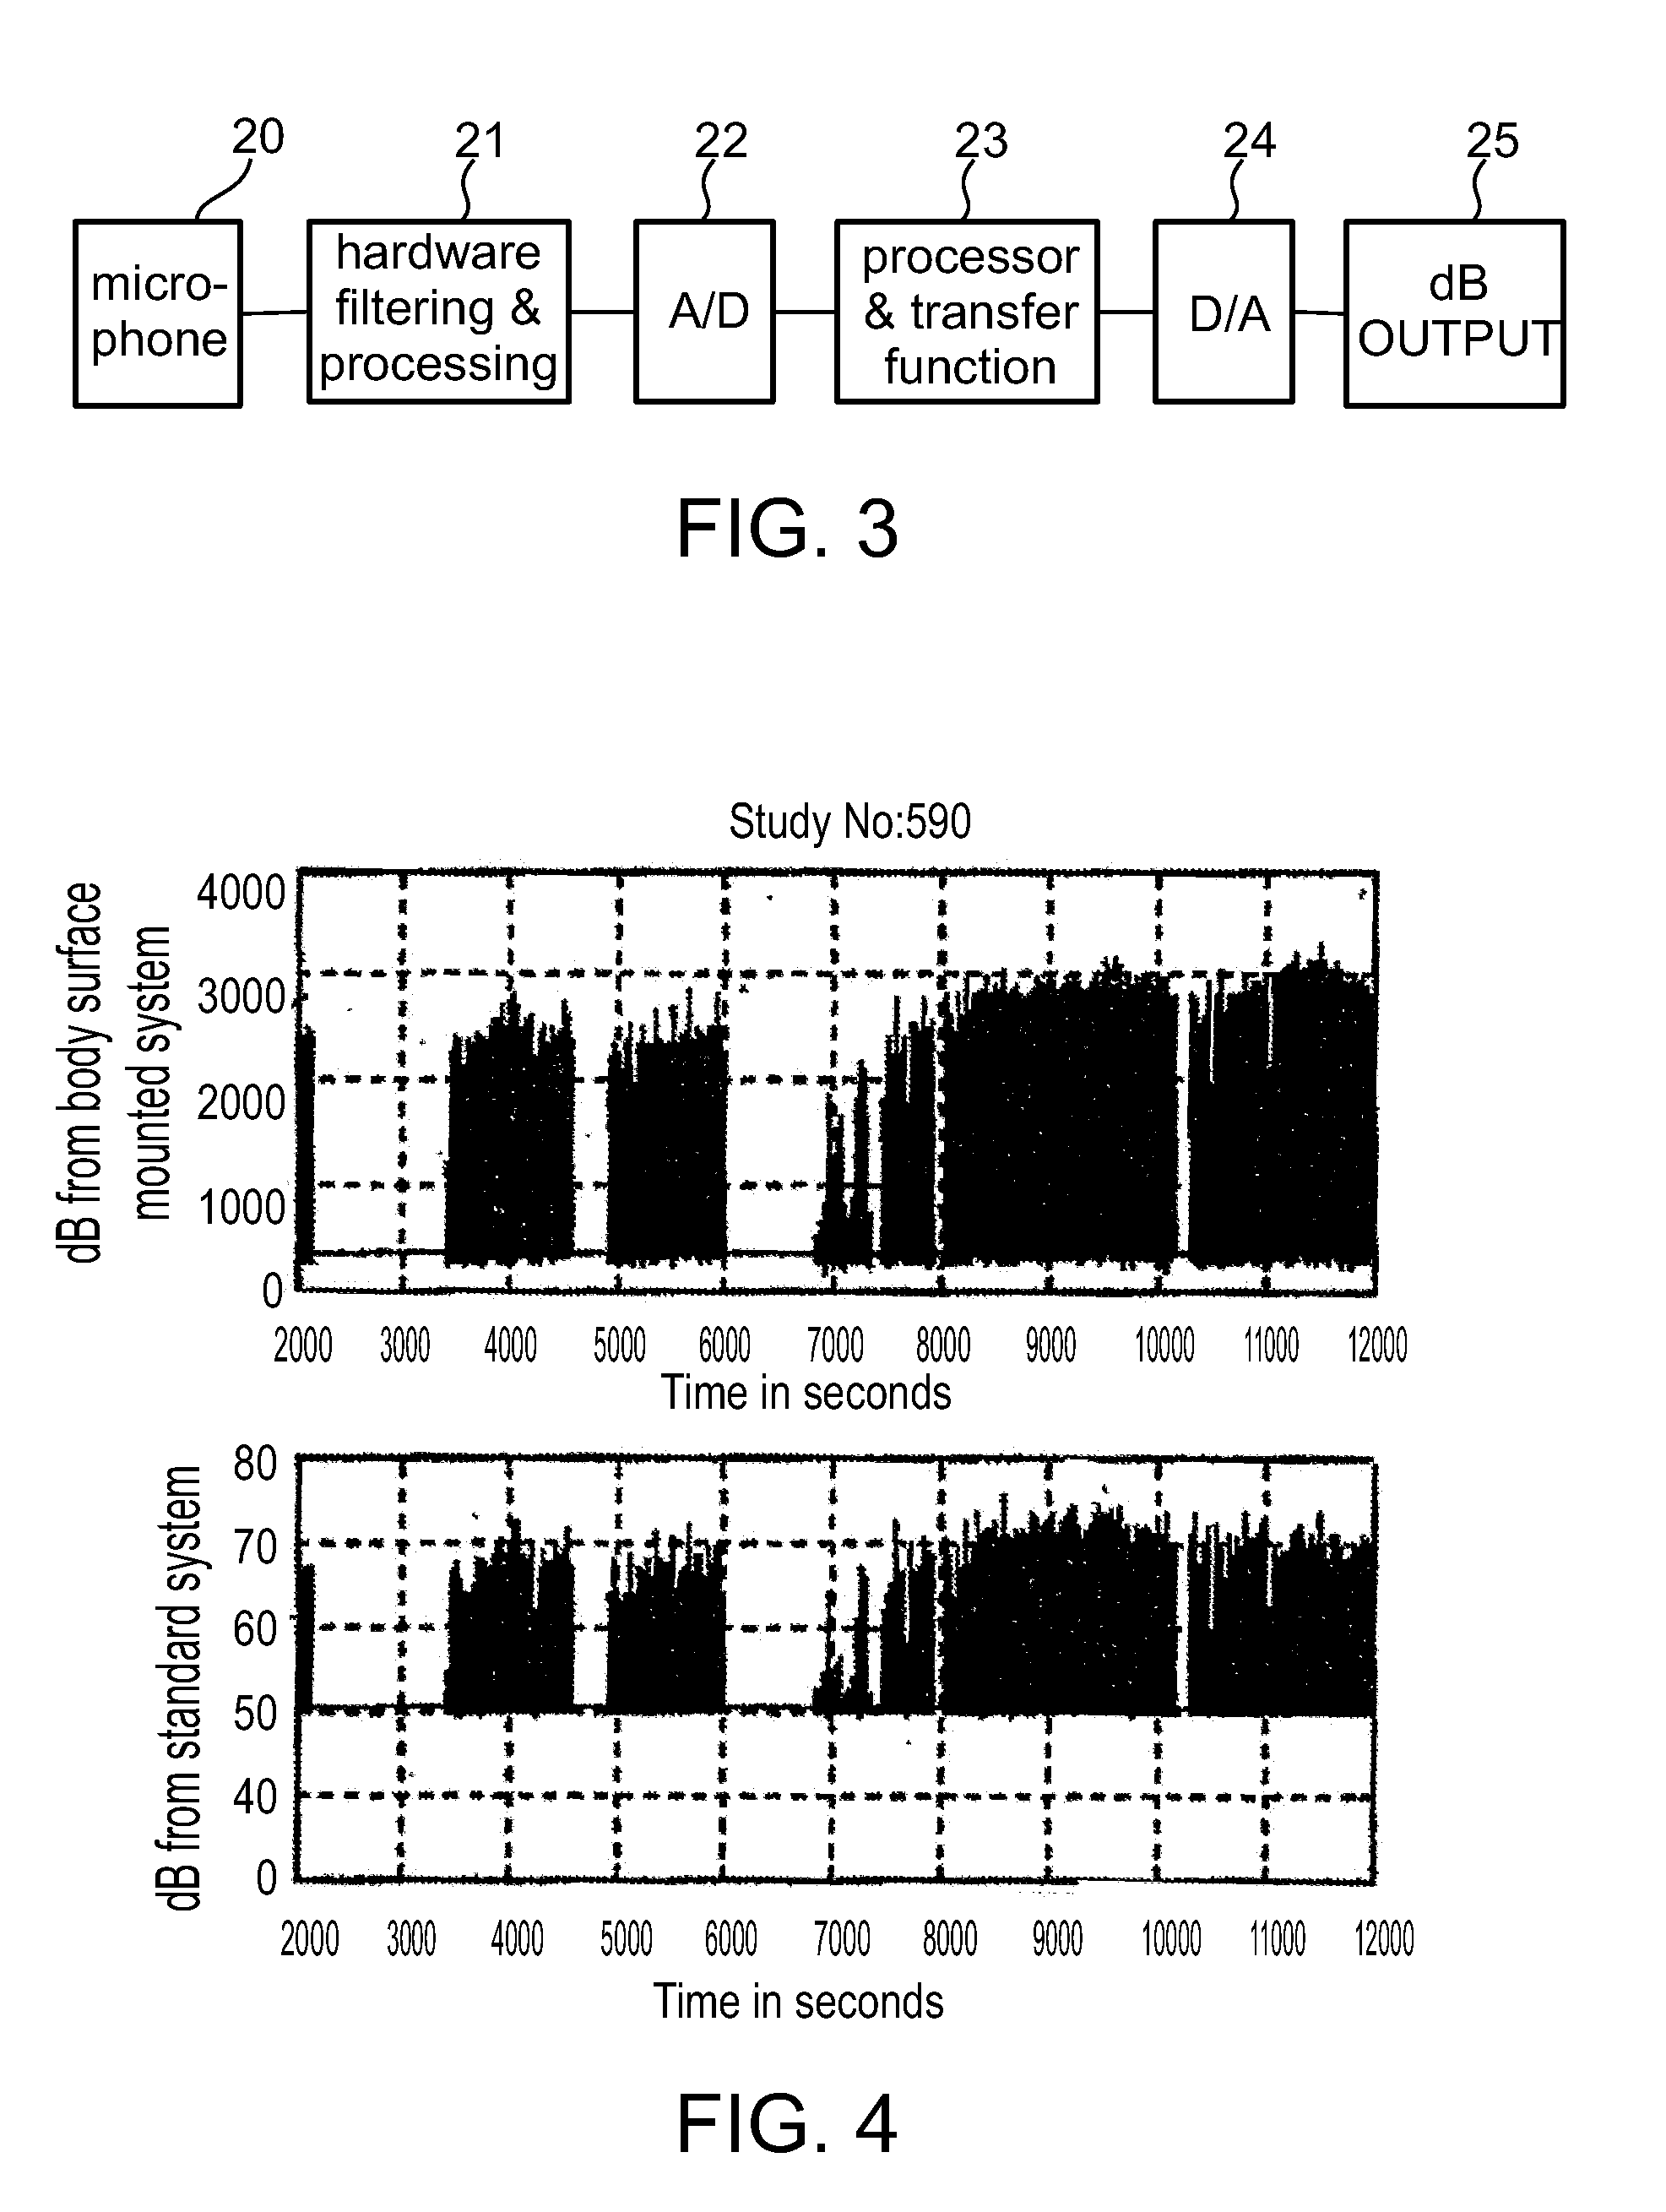 Method and apparatus for examining subjects for particular physiological conditions utilizing acoustic information